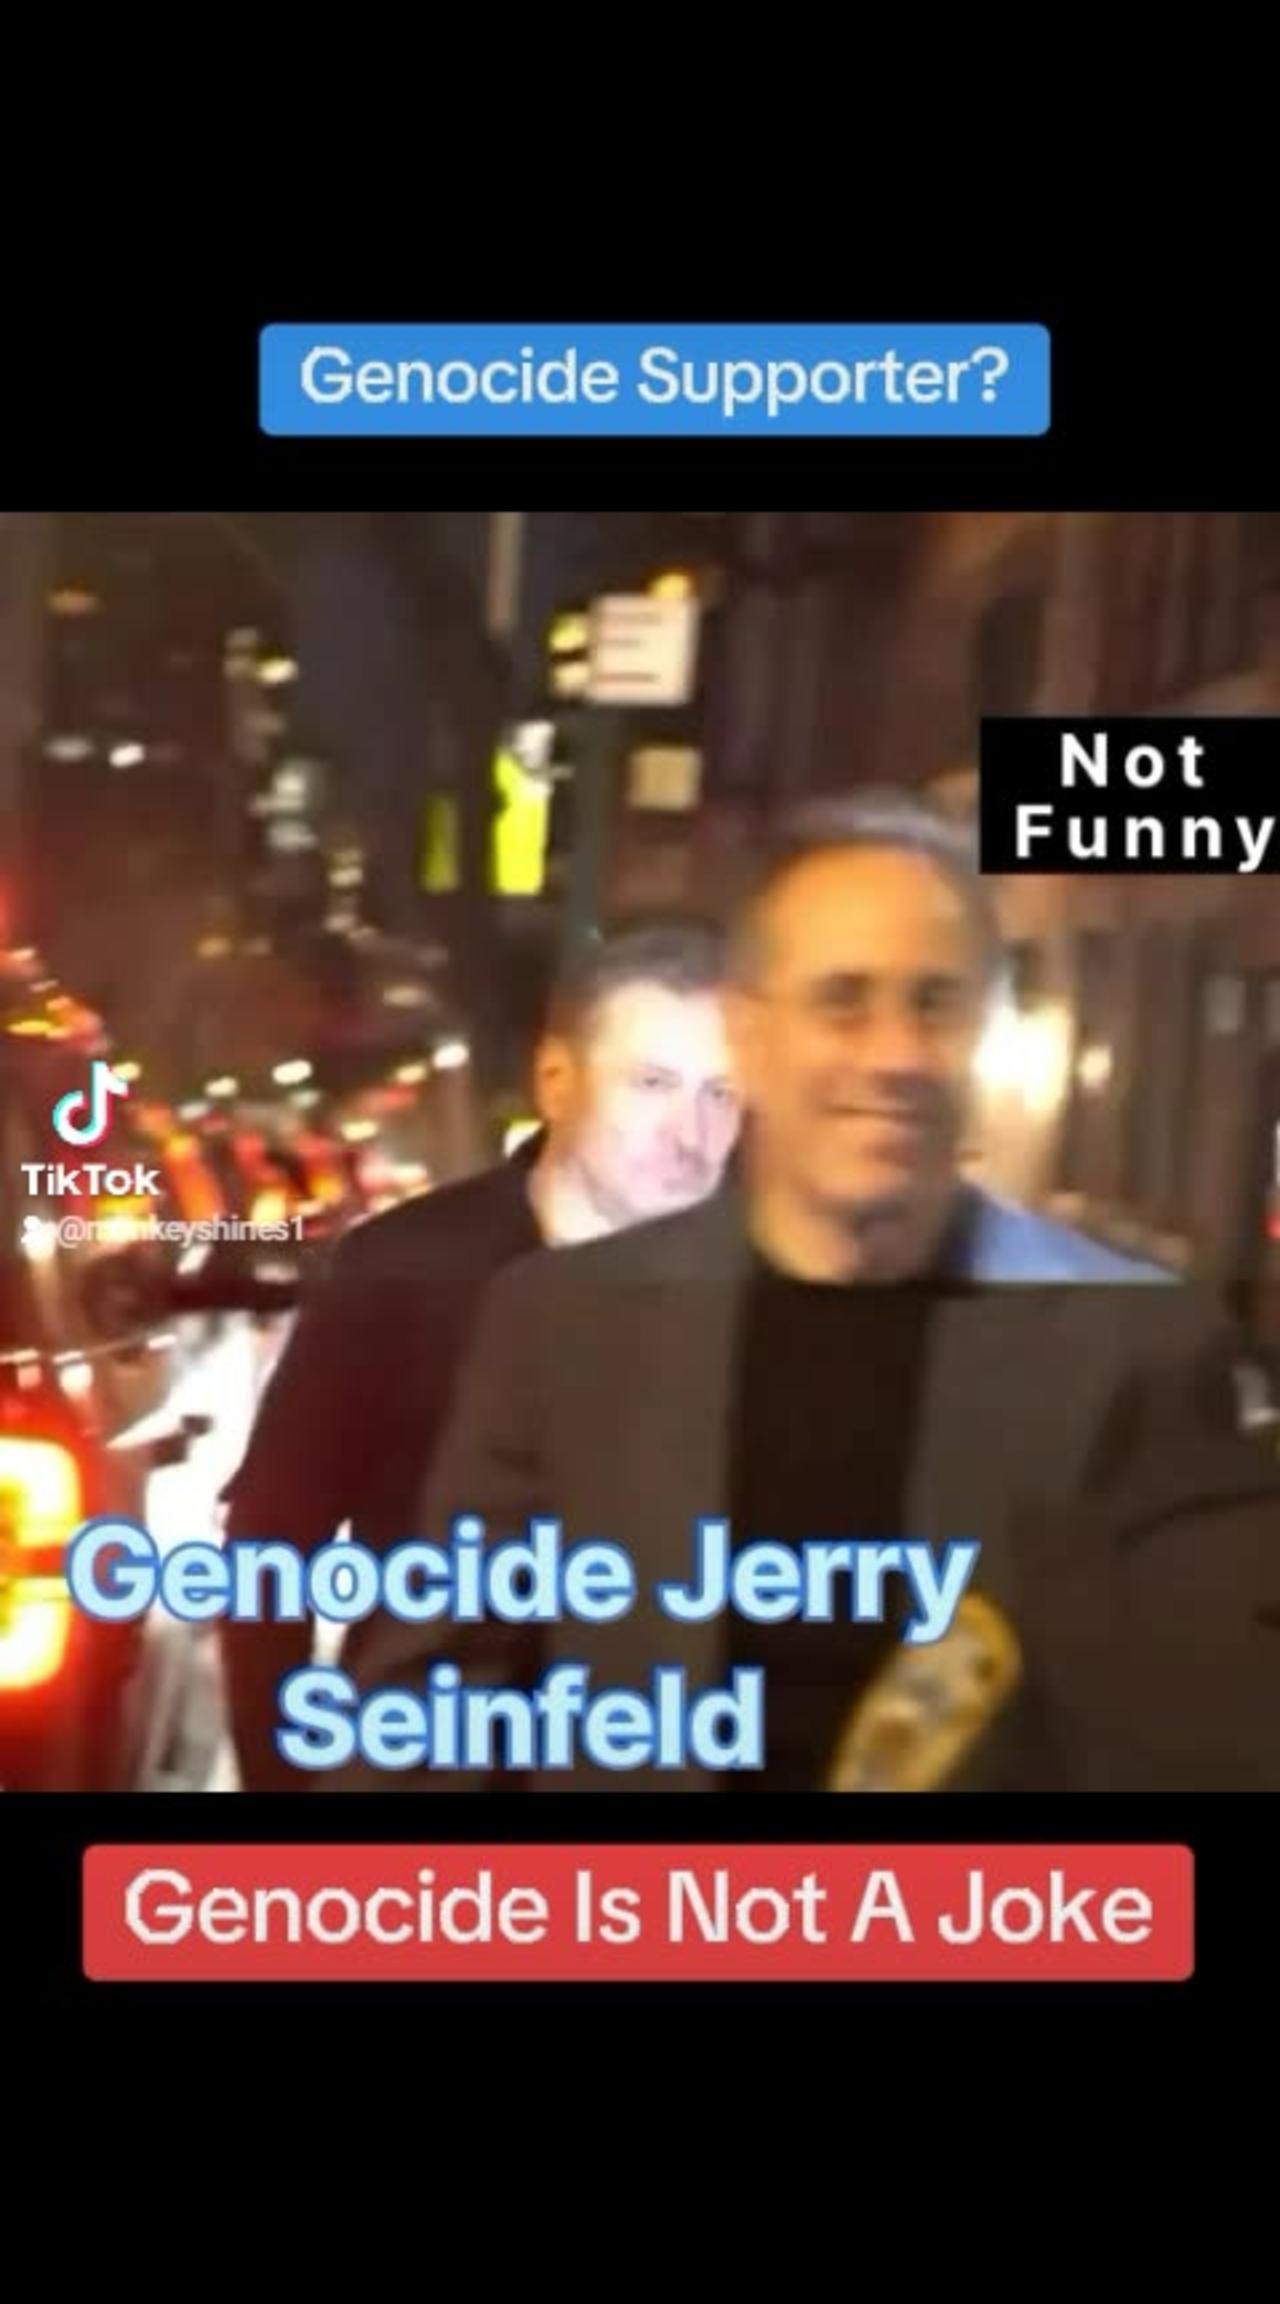 Jerry Seinfeld Called Genocide Supporter